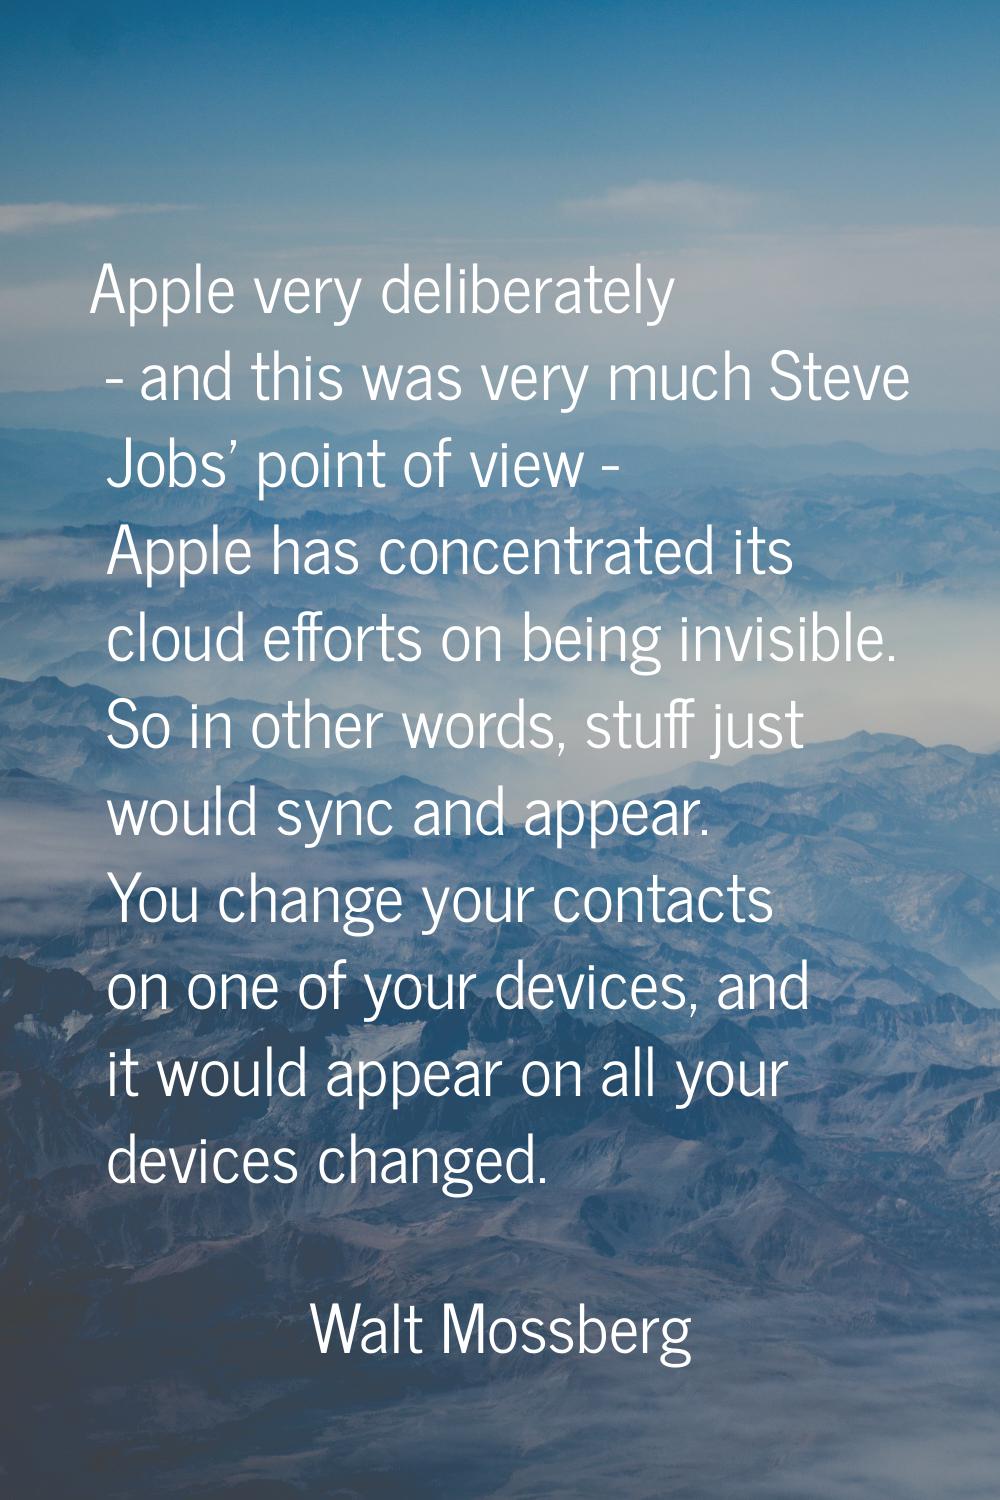 Apple very deliberately - and this was very much Steve Jobs' point of view - Apple has concentrated